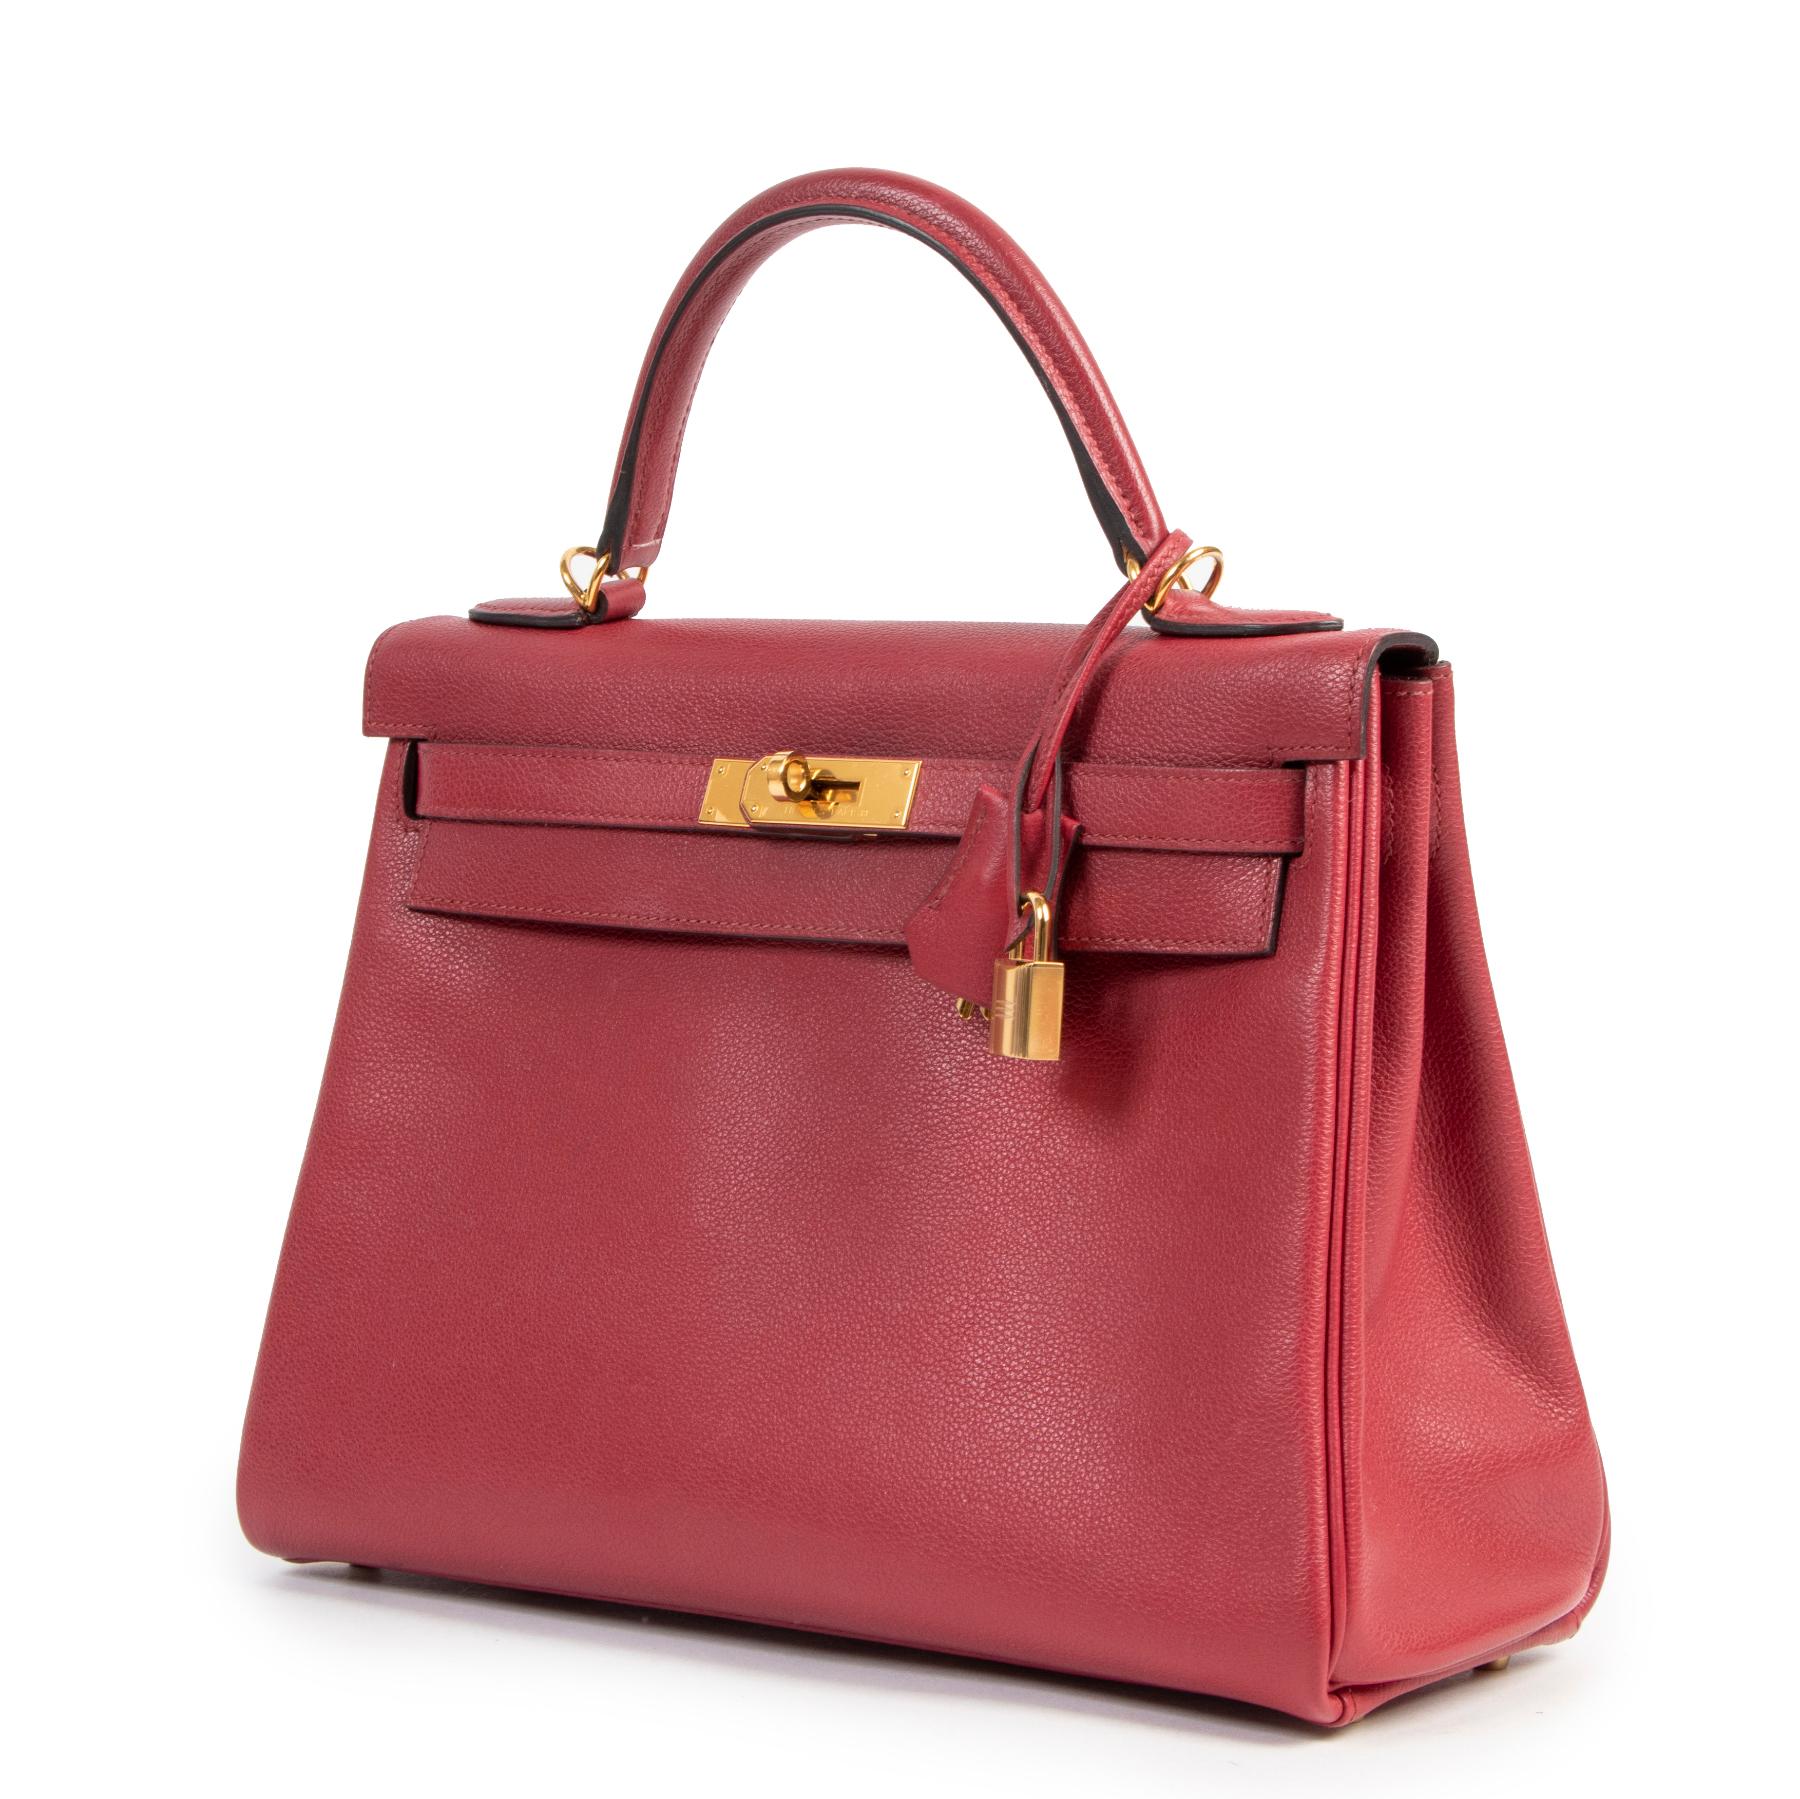 Very good condition

Hermes Kelly 32 Rouge Grenat Veau Evercolor GHW

Renamed after the princess of Monaco, Grace Kelly, the Hermès Kelly is one of most trendy sized and hard-to-get bag. The vibrant Rouge Grenat hue of this one will brighten up your